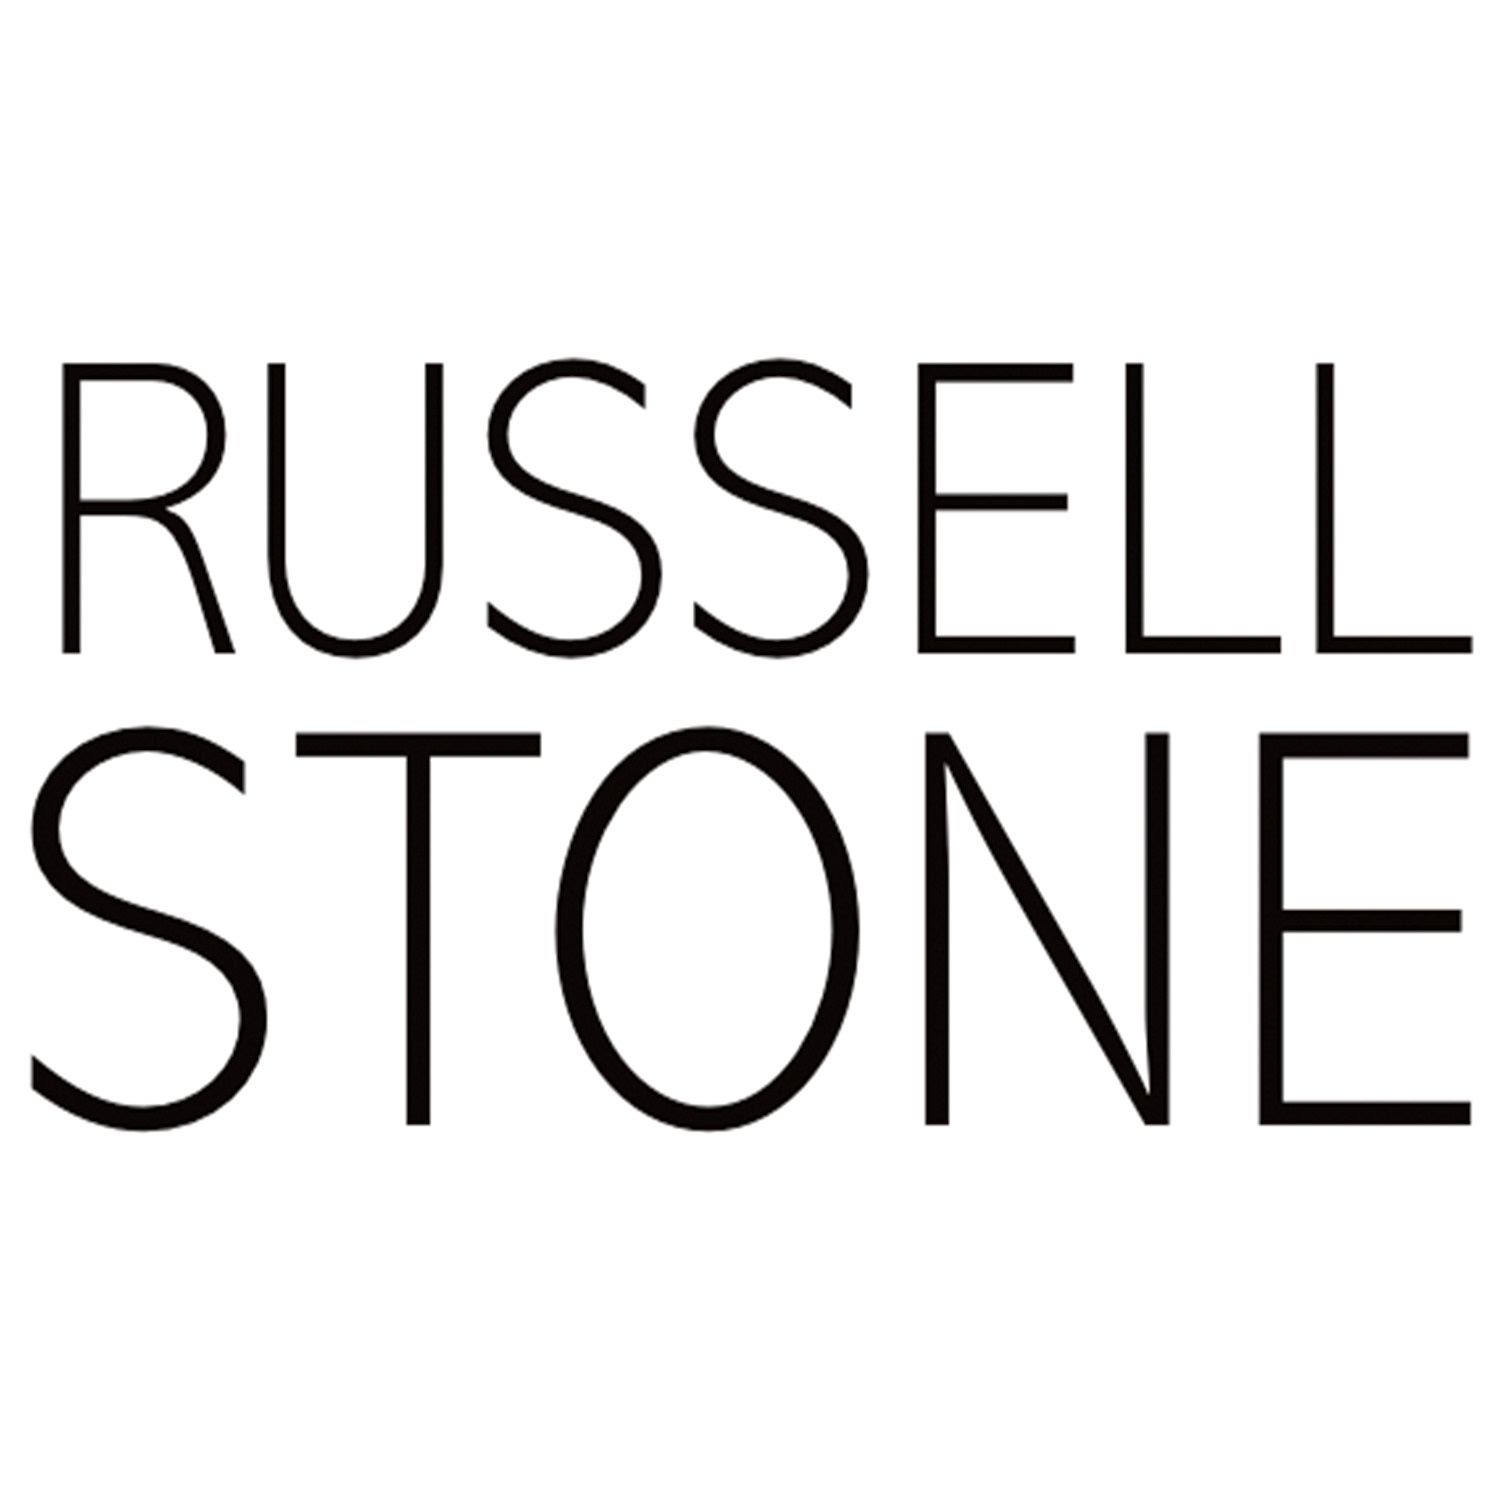 Russell Stone